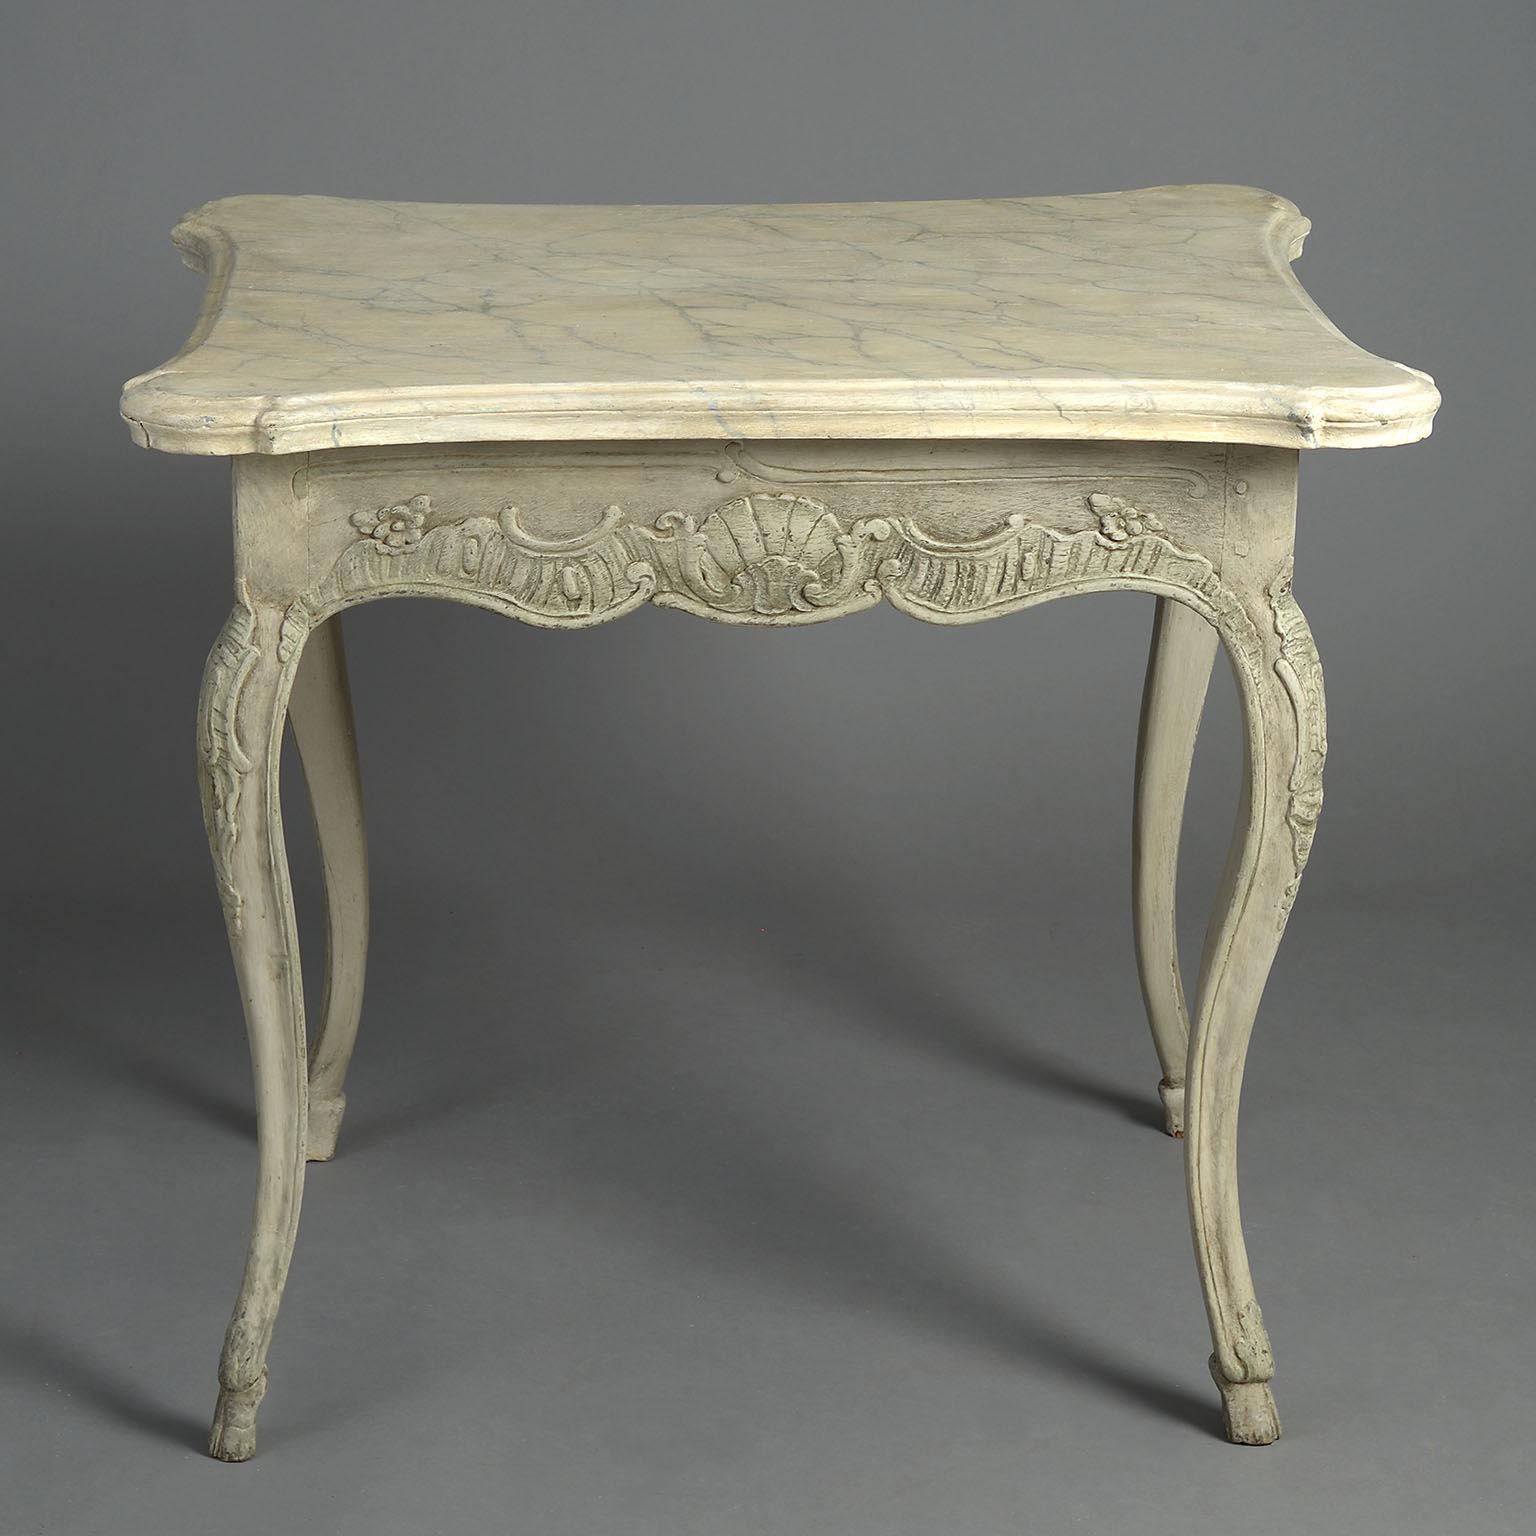 The serpentine top decorated with faux marble paintwork above a frieze carved with Rococo scrollwork and shells raised on similarly carved cabriole legs terminating in hoof feet.